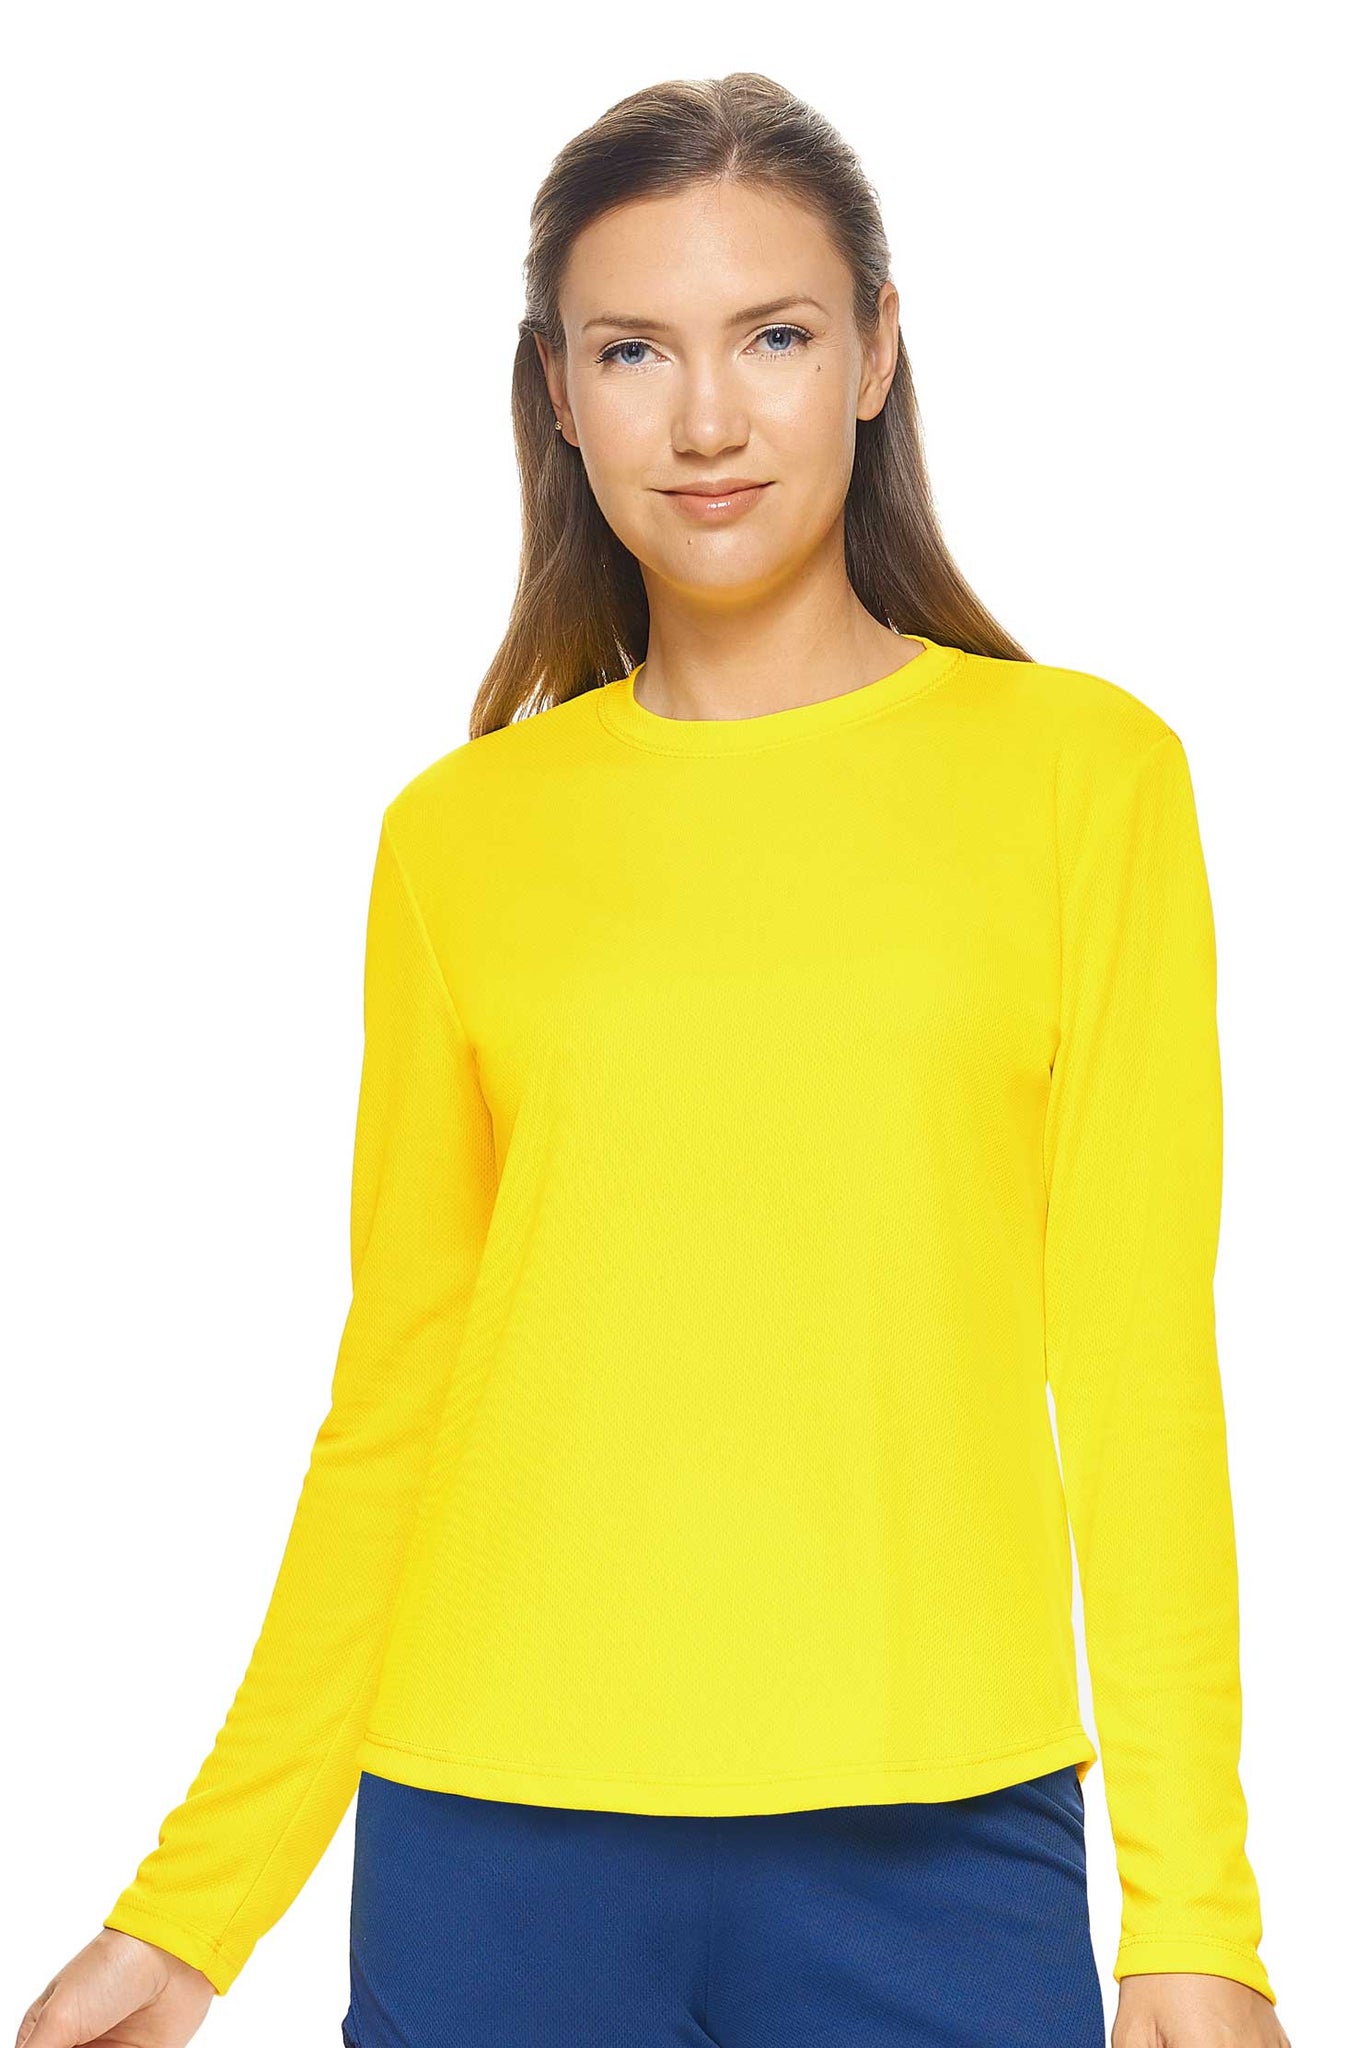 Expert Brand Wholesale Women's Oxymesh Crewneck Performance Tee Made in USA AJ301D Bright Yellow#bright-yellow